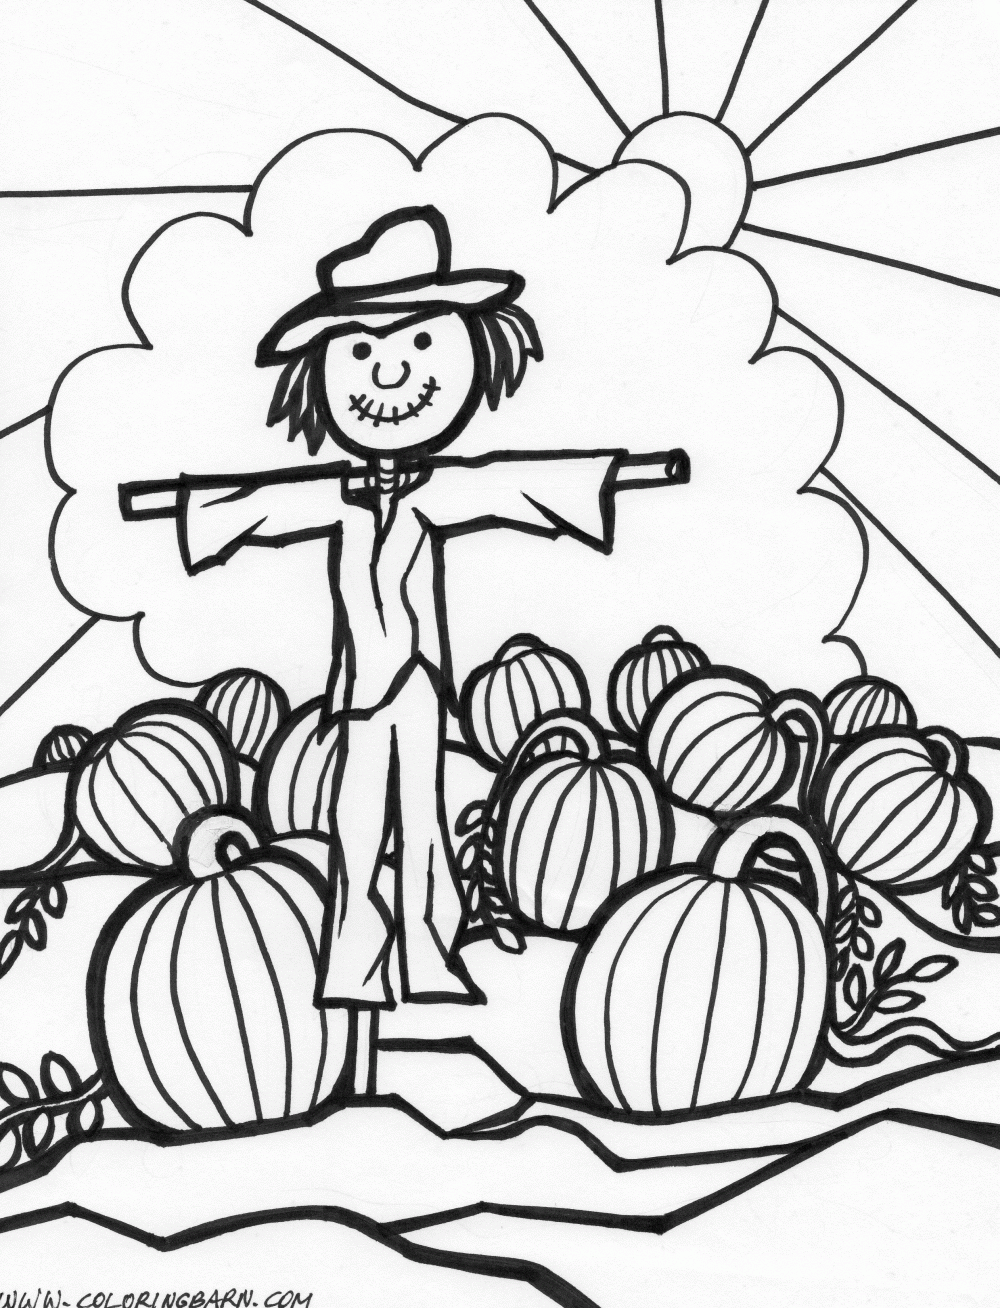 September coloring pages to download and print for free